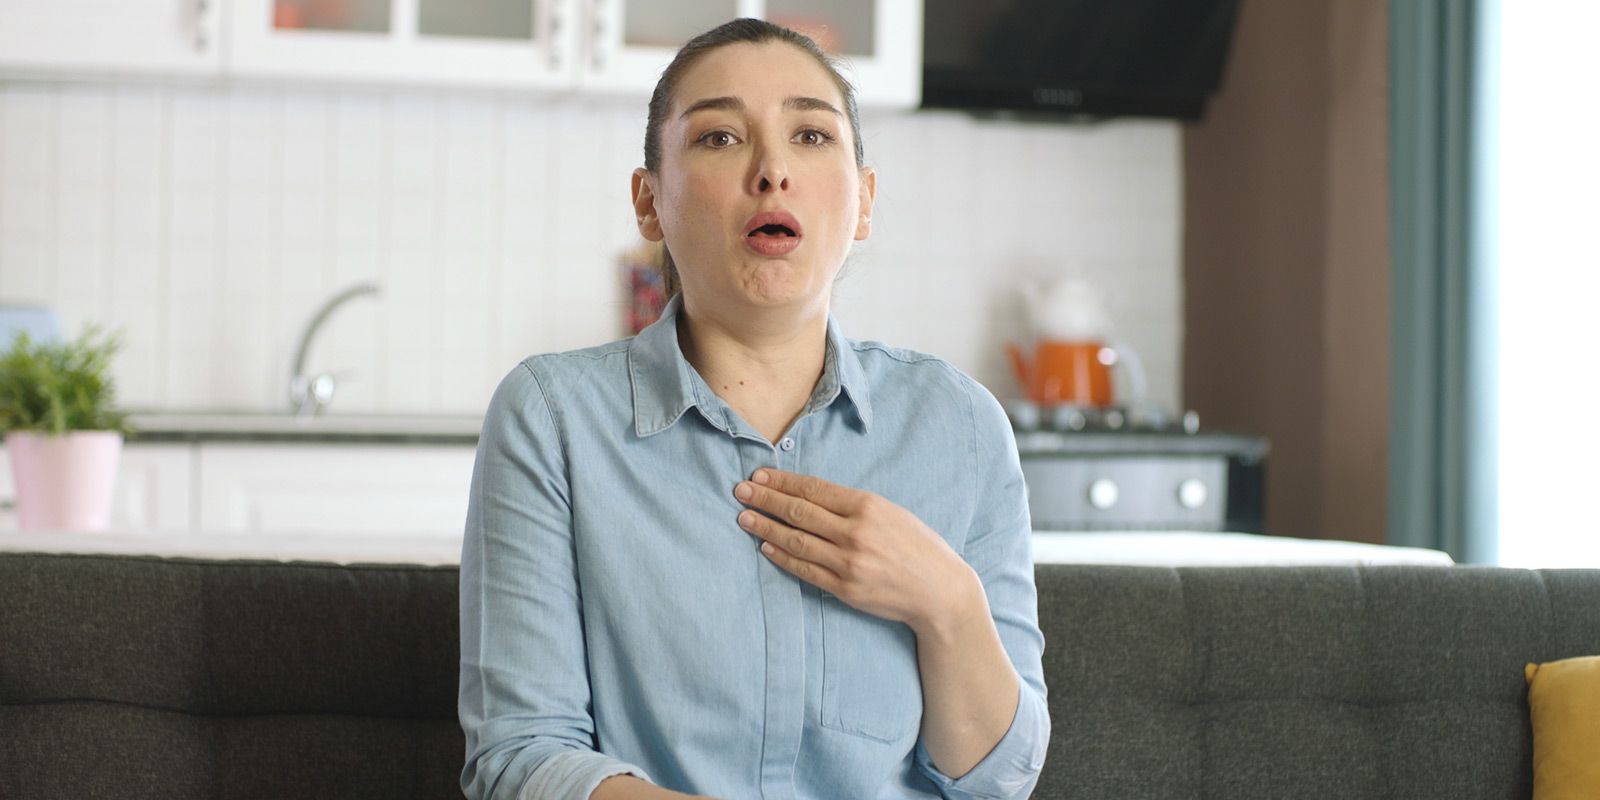 GERD Remedies NYC - Dr. Alicia Armitstead. Natural Remedies for Gastroesophageal Reflux Disease at the Healing Arts NYC Health and Wellness Center in Manhattan NY and Connecticut